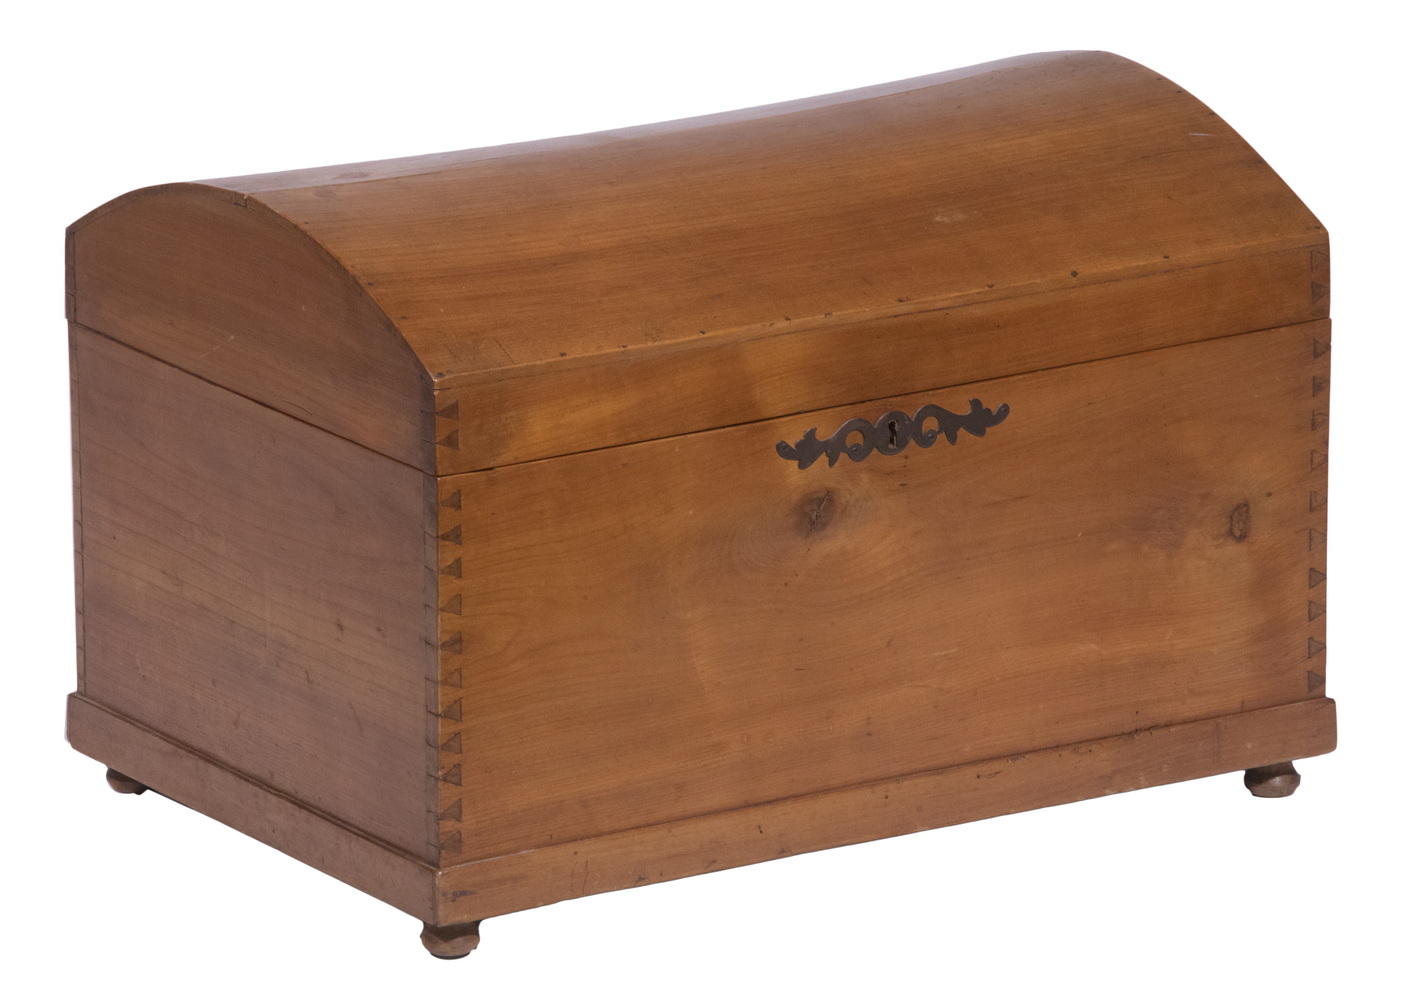 DOME TOP STORAGE TRUNK Soft Wood